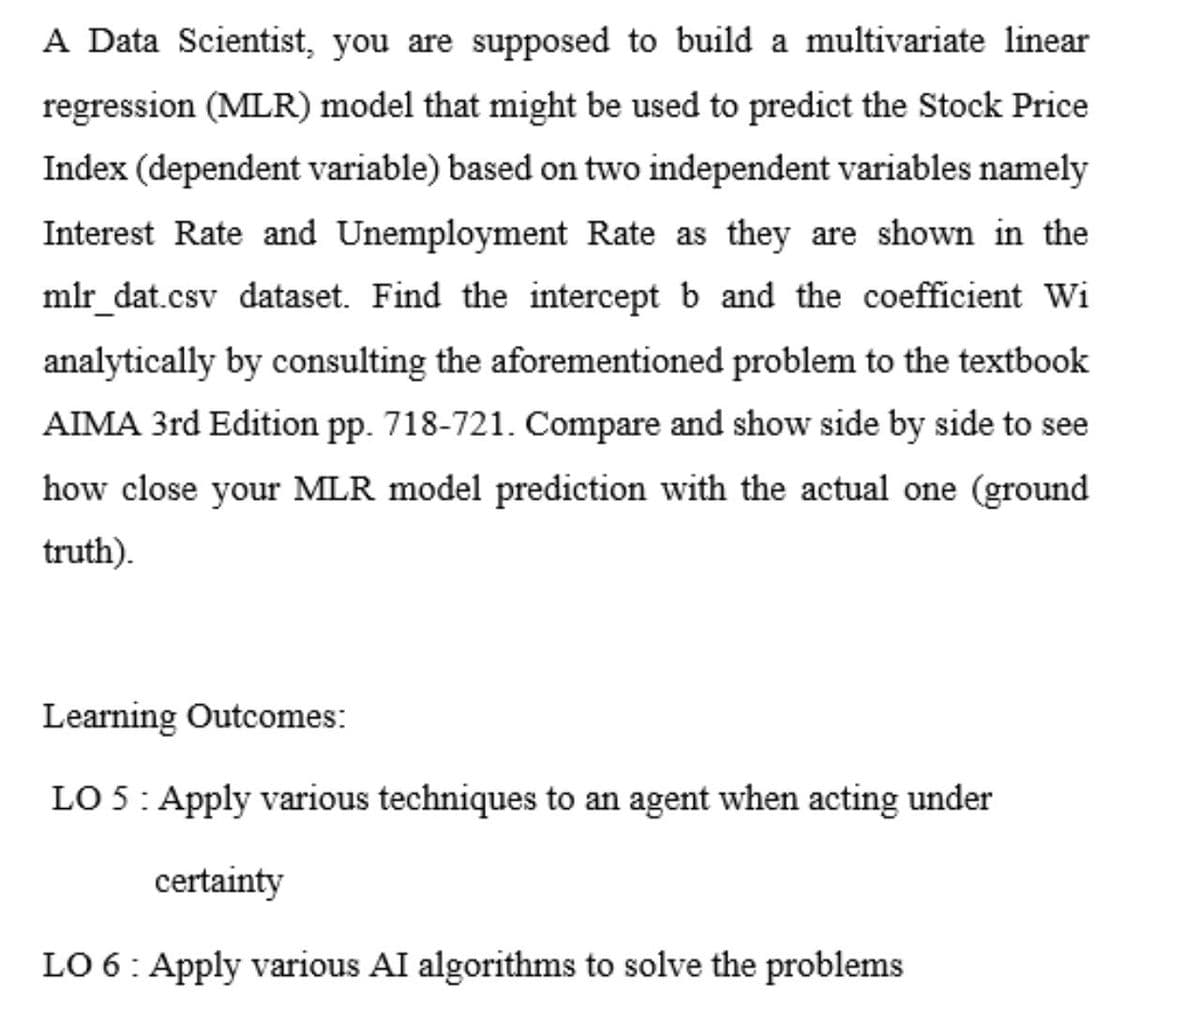 A Data Scientist, you are supposed to build a multivariate linear
regression (MLR) model that might be used to predict the Stock Price
Index (dependent variable) based on two independent variables namely
Interest Rate and Unemployment Rate as they are shown in the
mlr_dat.csv dataset. Find the intercept b and the coefficient Wi
analytically by consulting the aforementioned problem to the textbook
AIMA 3rd Edition pp. 718-721. Compare and show side by side to see
how close your MLR model prediction with the actual one (ground
truth).
Learning Outcomes:
LO 5: Apply various techniques to an agent when acting under
certainty
LO 6: Apply various AI algorithms to solve the problems
